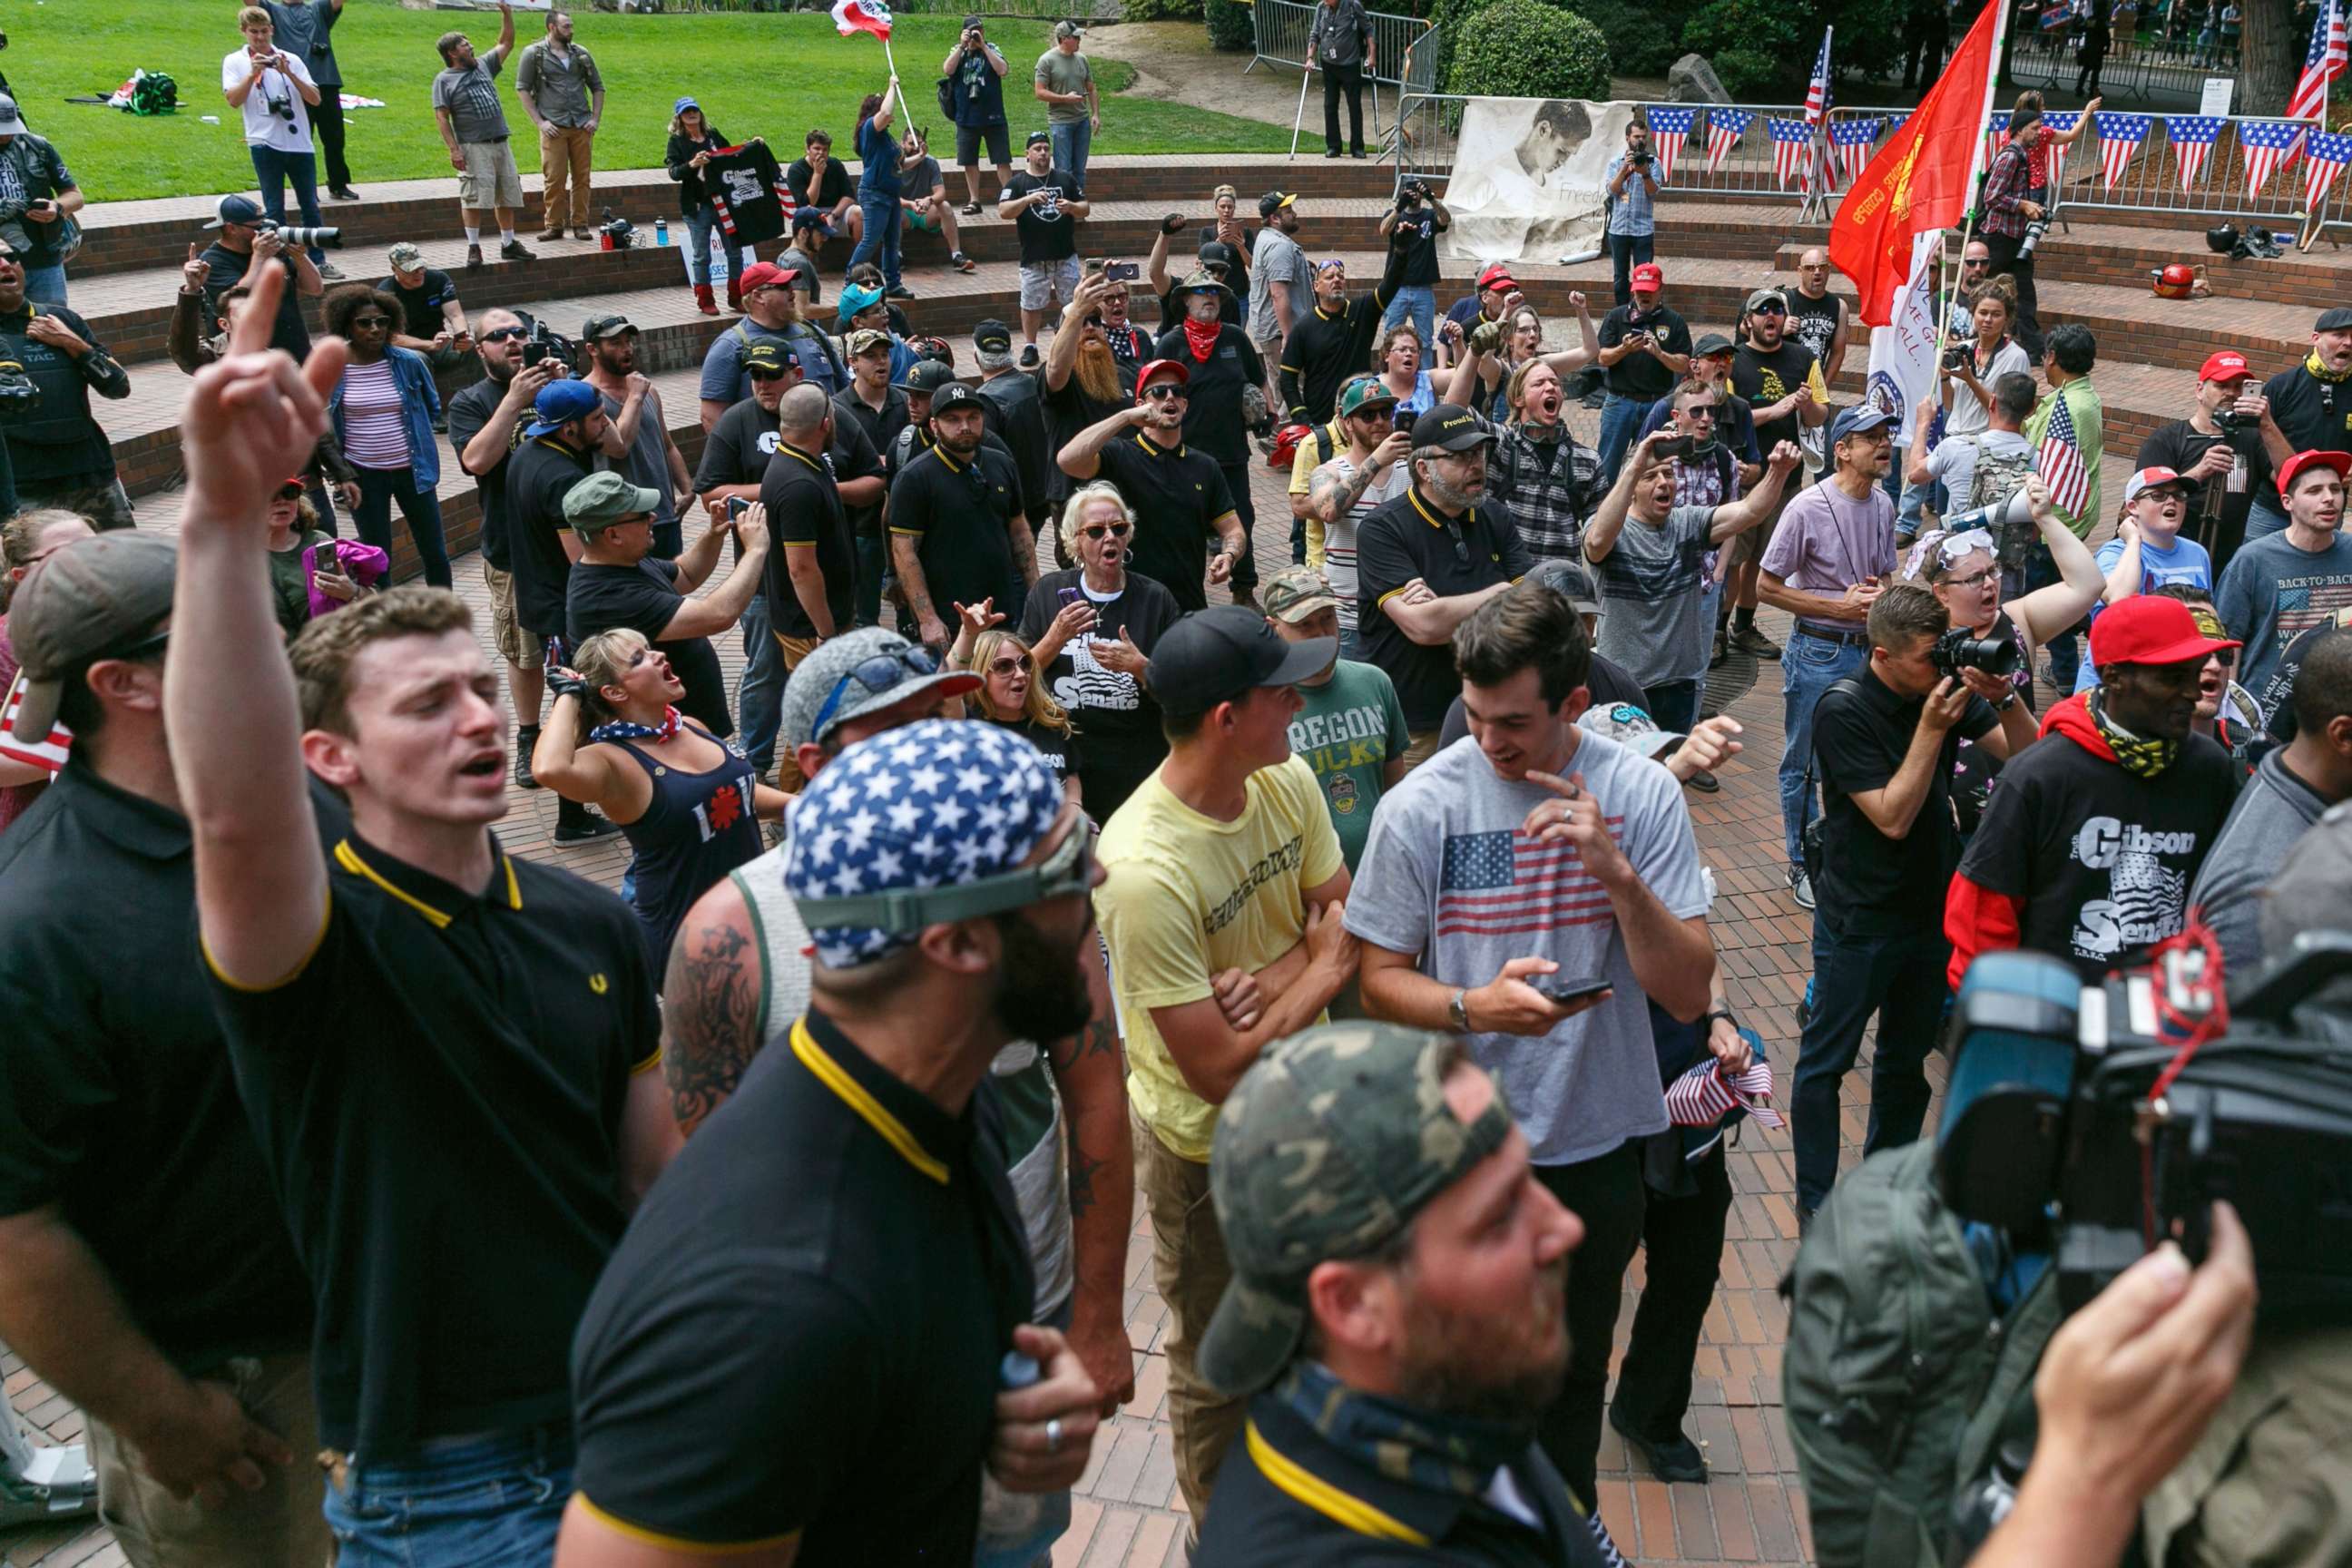 PHOTO: Alt-Right, Proud Boy, and 'Patriot Prayer' members staged a "Freedom and Courage" rally and march in Portland, Oregon on June 30, 2018.